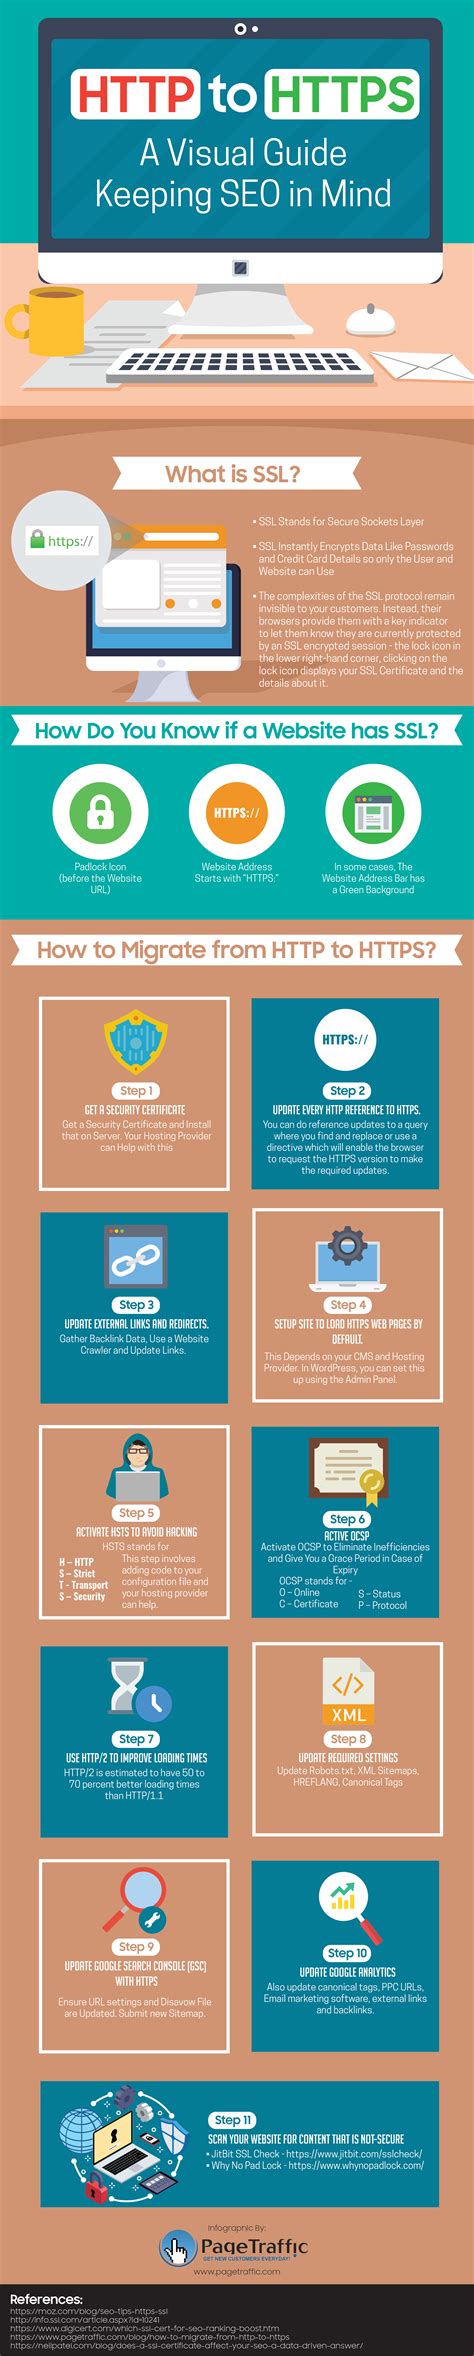 infographic http  https  visual guide keeping seo  mind pagetraffic blog